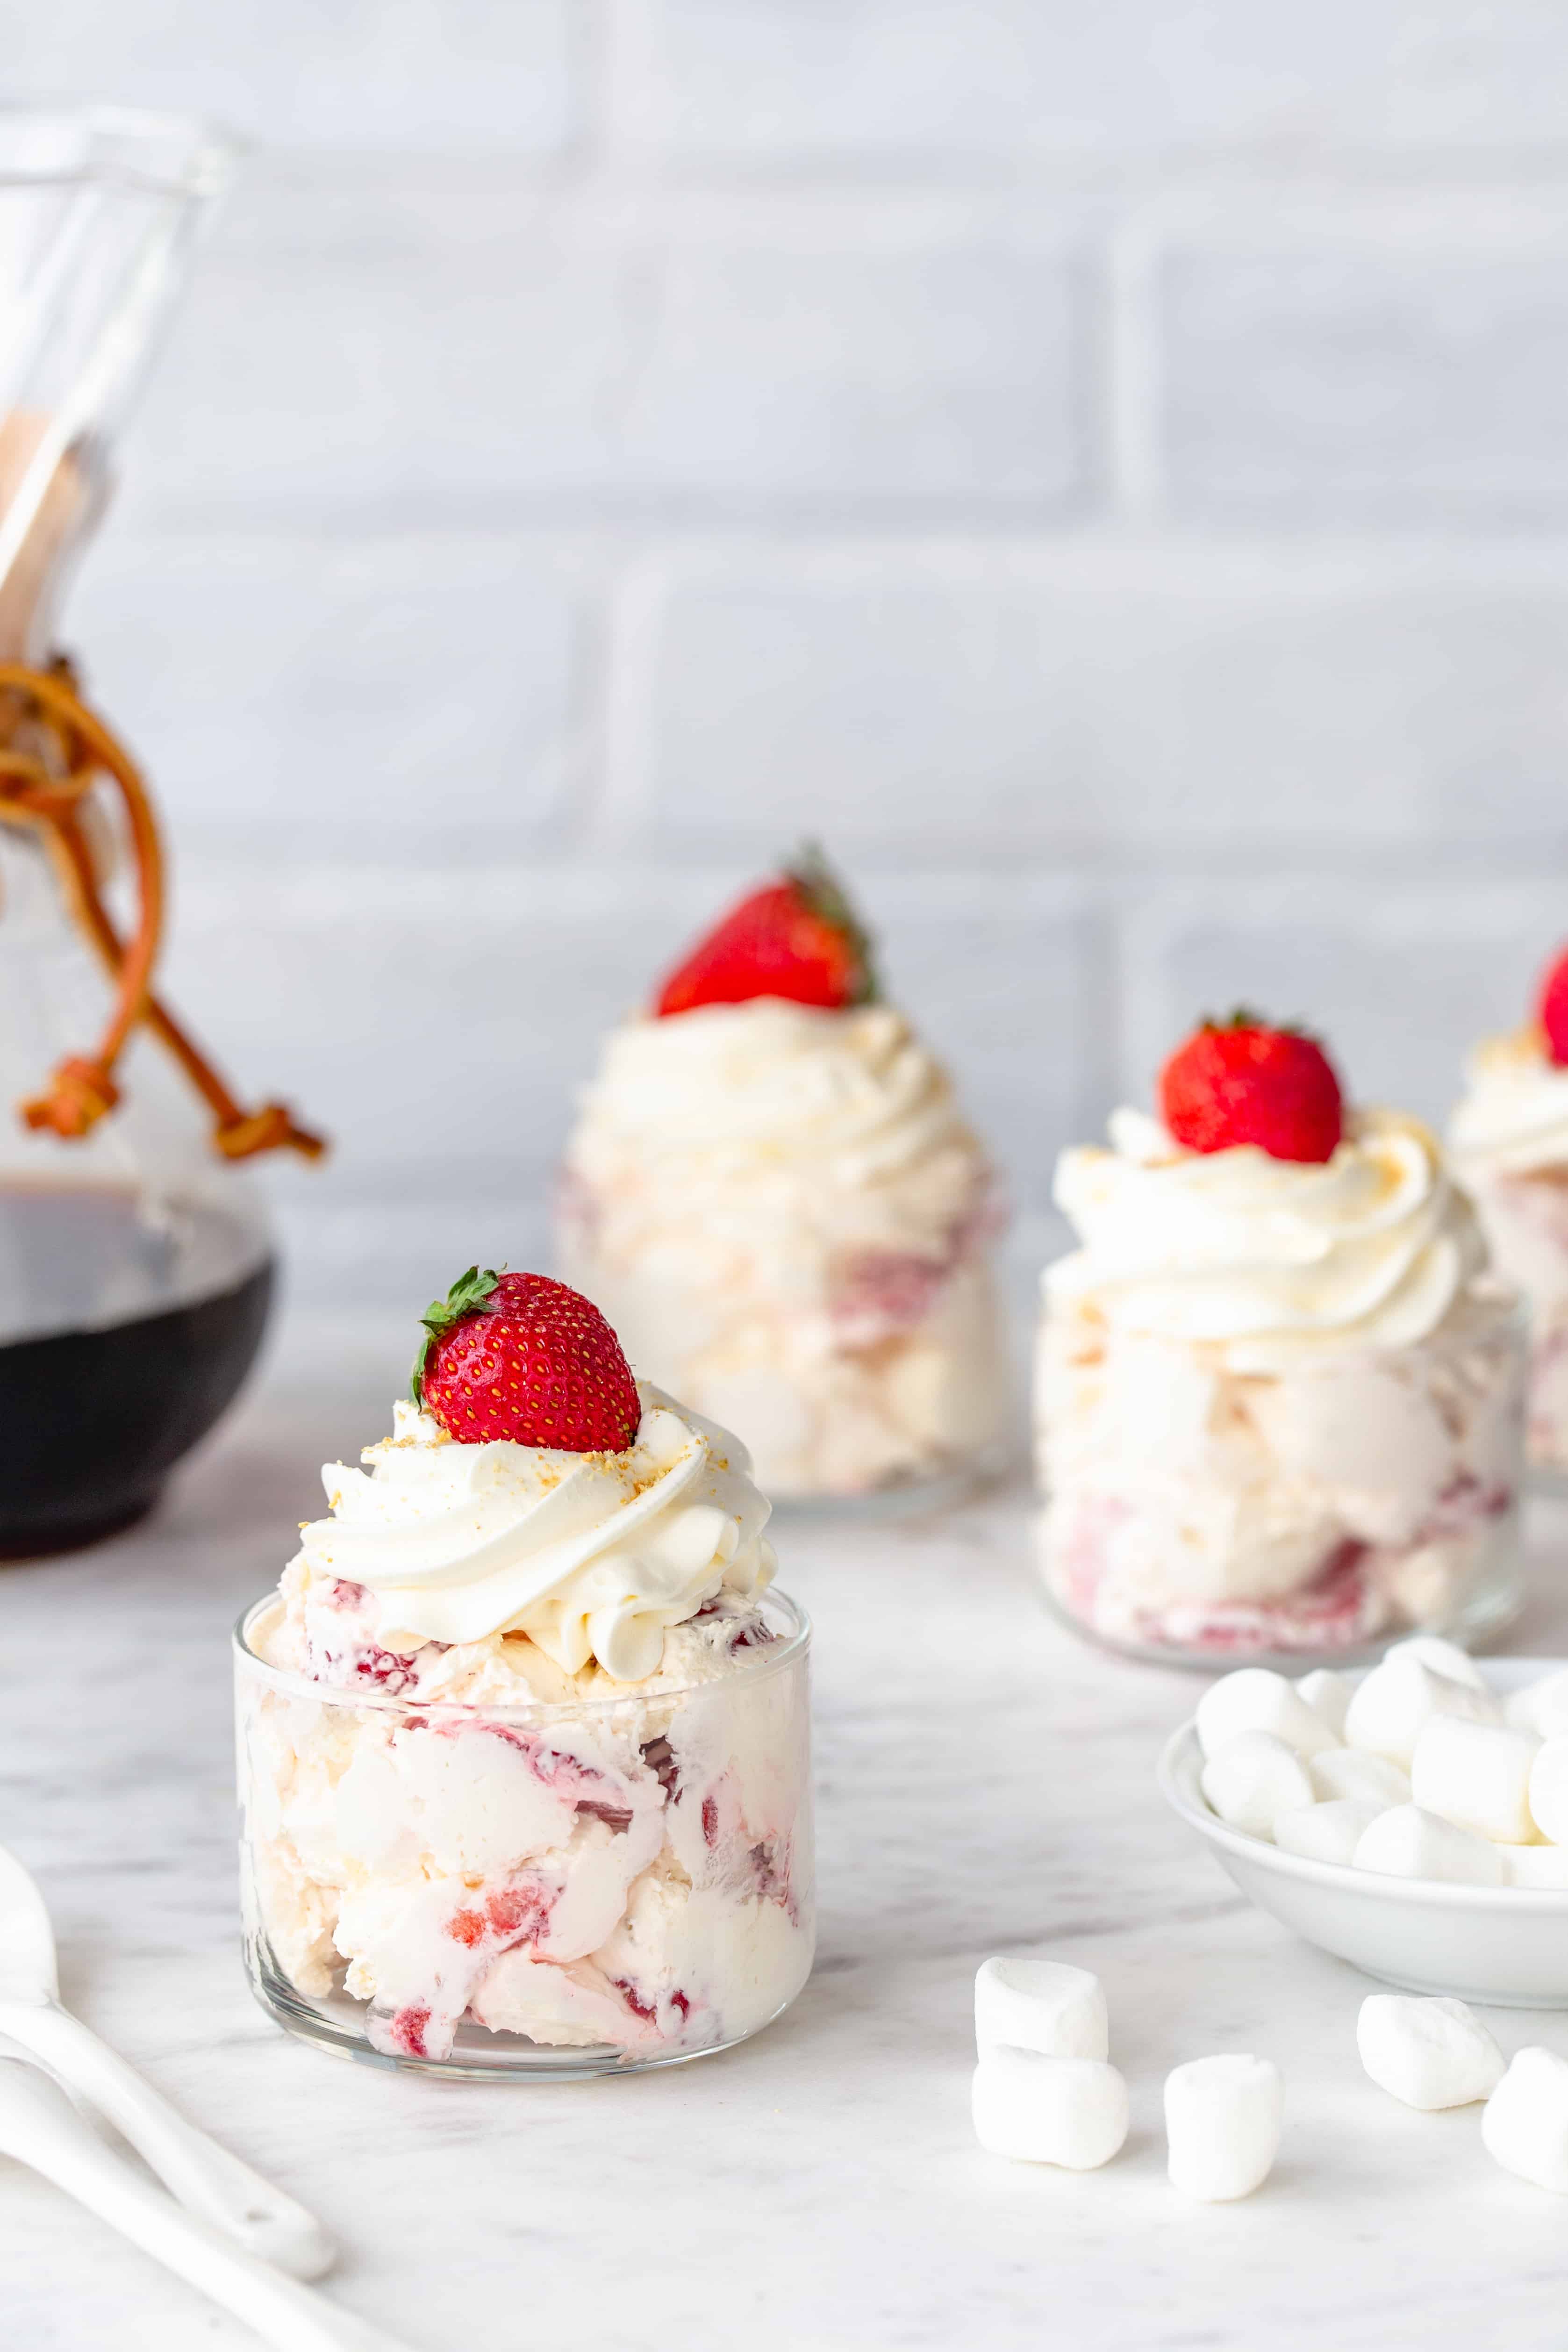 Strawberry Cheesecake Fluff will become your new favorite dessert for pot-lucks, parties, barbecues, or just a random weeknight. Simple and so delicious!